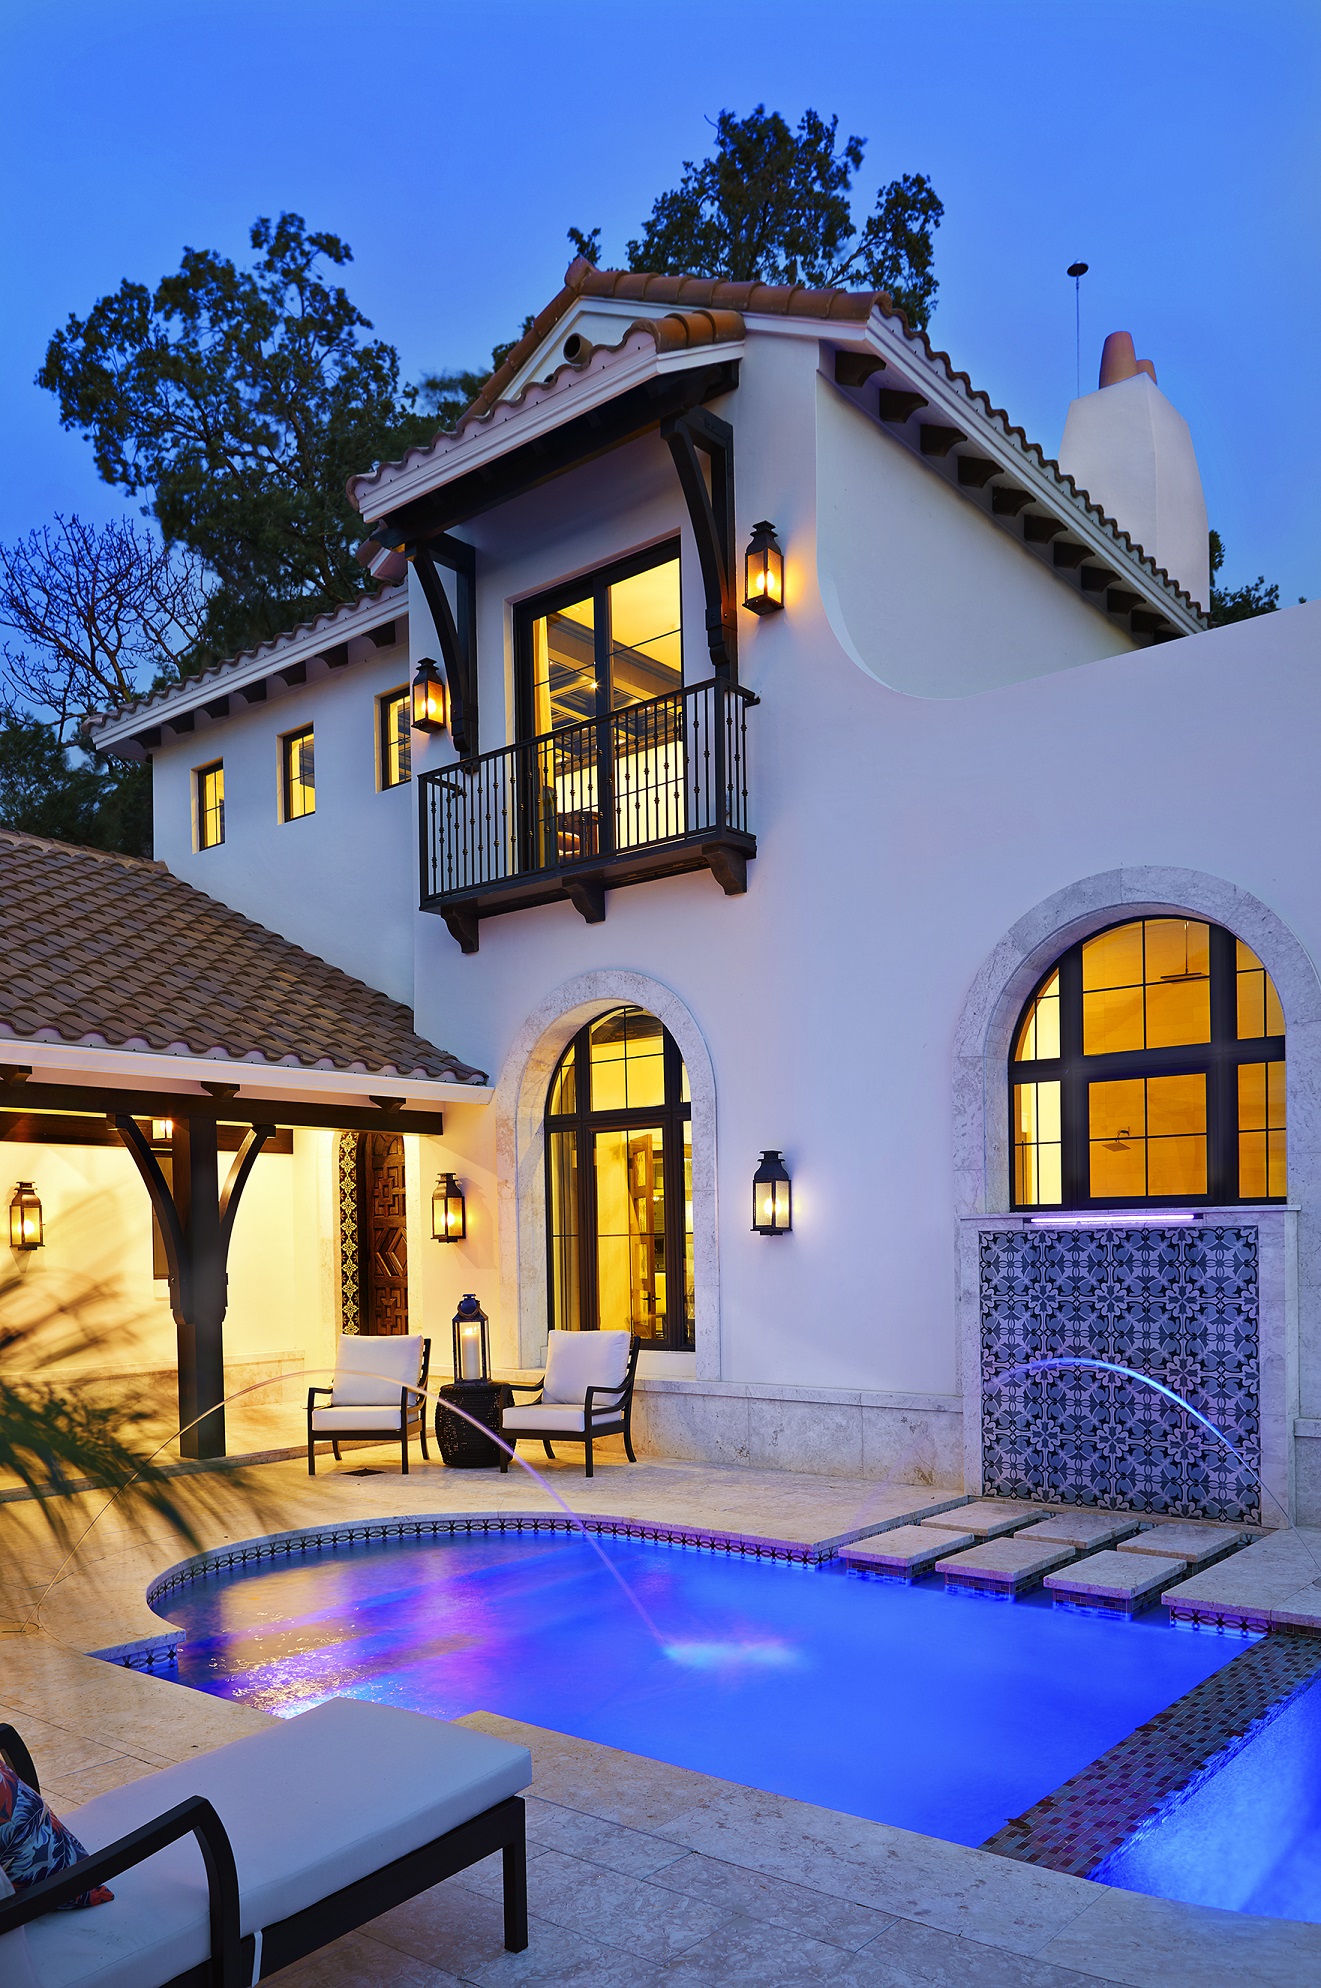 A contemporary courtyard interpretation of the required Spanish Mission architectural style wraps the lush colors, senses and textures of the surroundings into the home’s exterior and interior design.